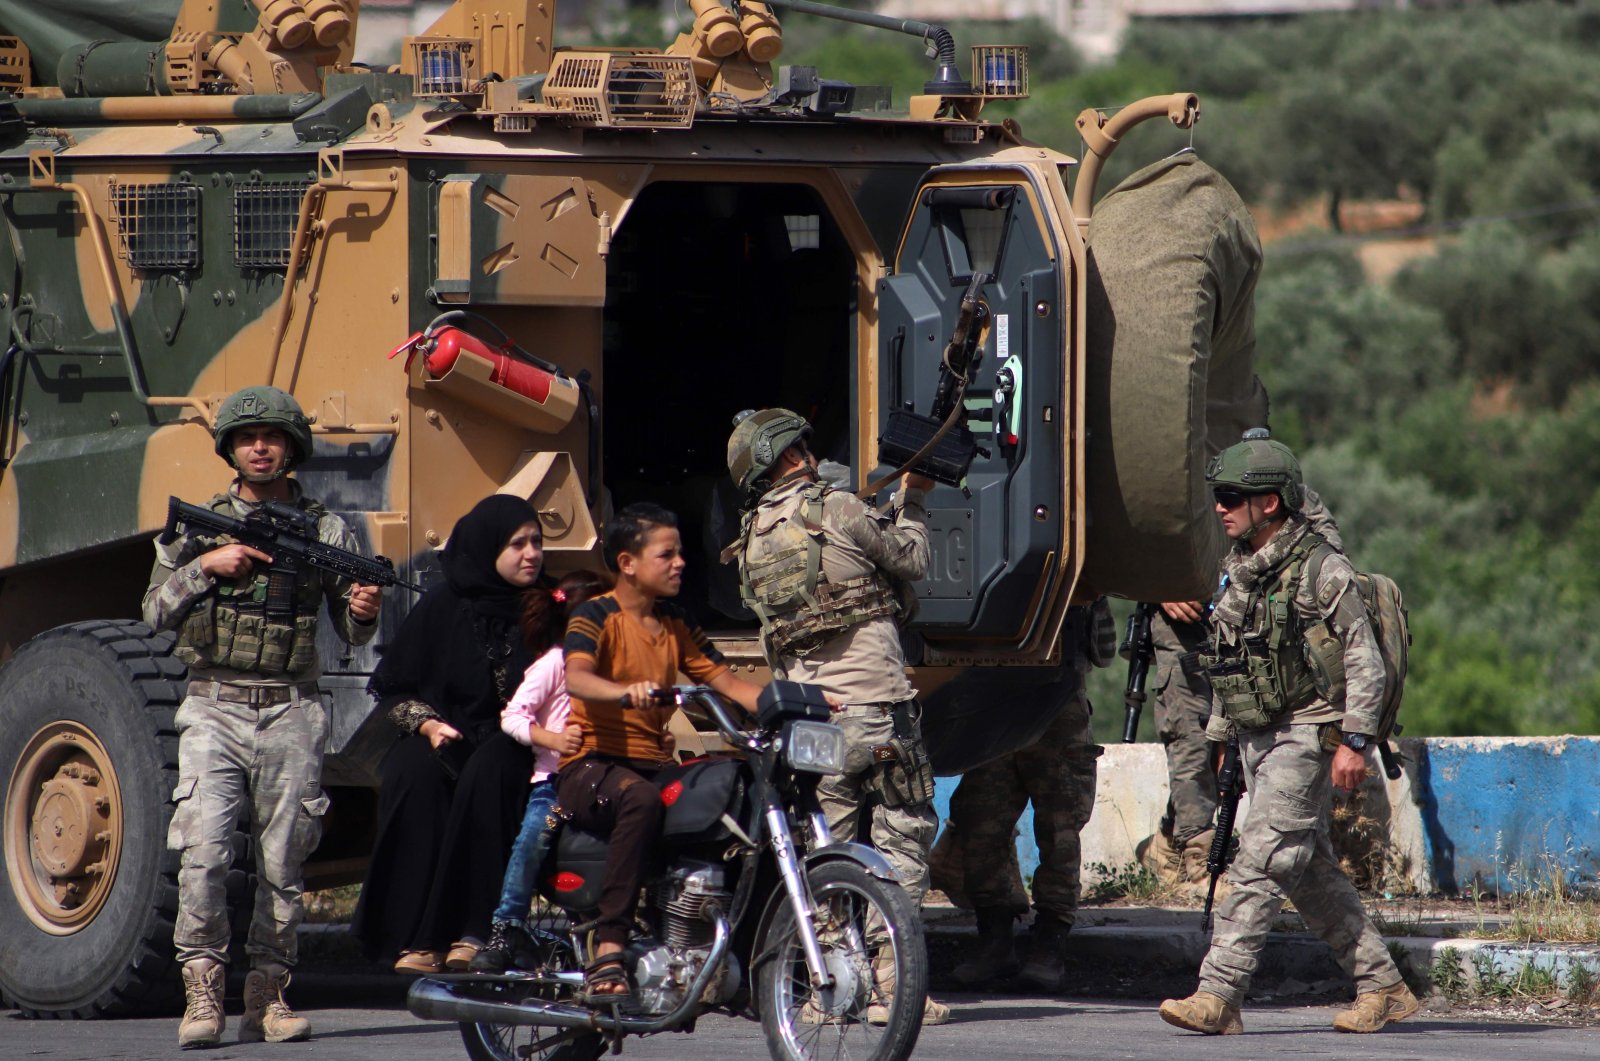 A youth rides a motorcycle carrying a woman and children past a Turkish armoured vehicle part of a joint Turkish-Russian military patrol along the M4 highway in Ariha in the opposition-held northwestern Syrian province of Idlib, June 2, 2020. (AFP Photo)